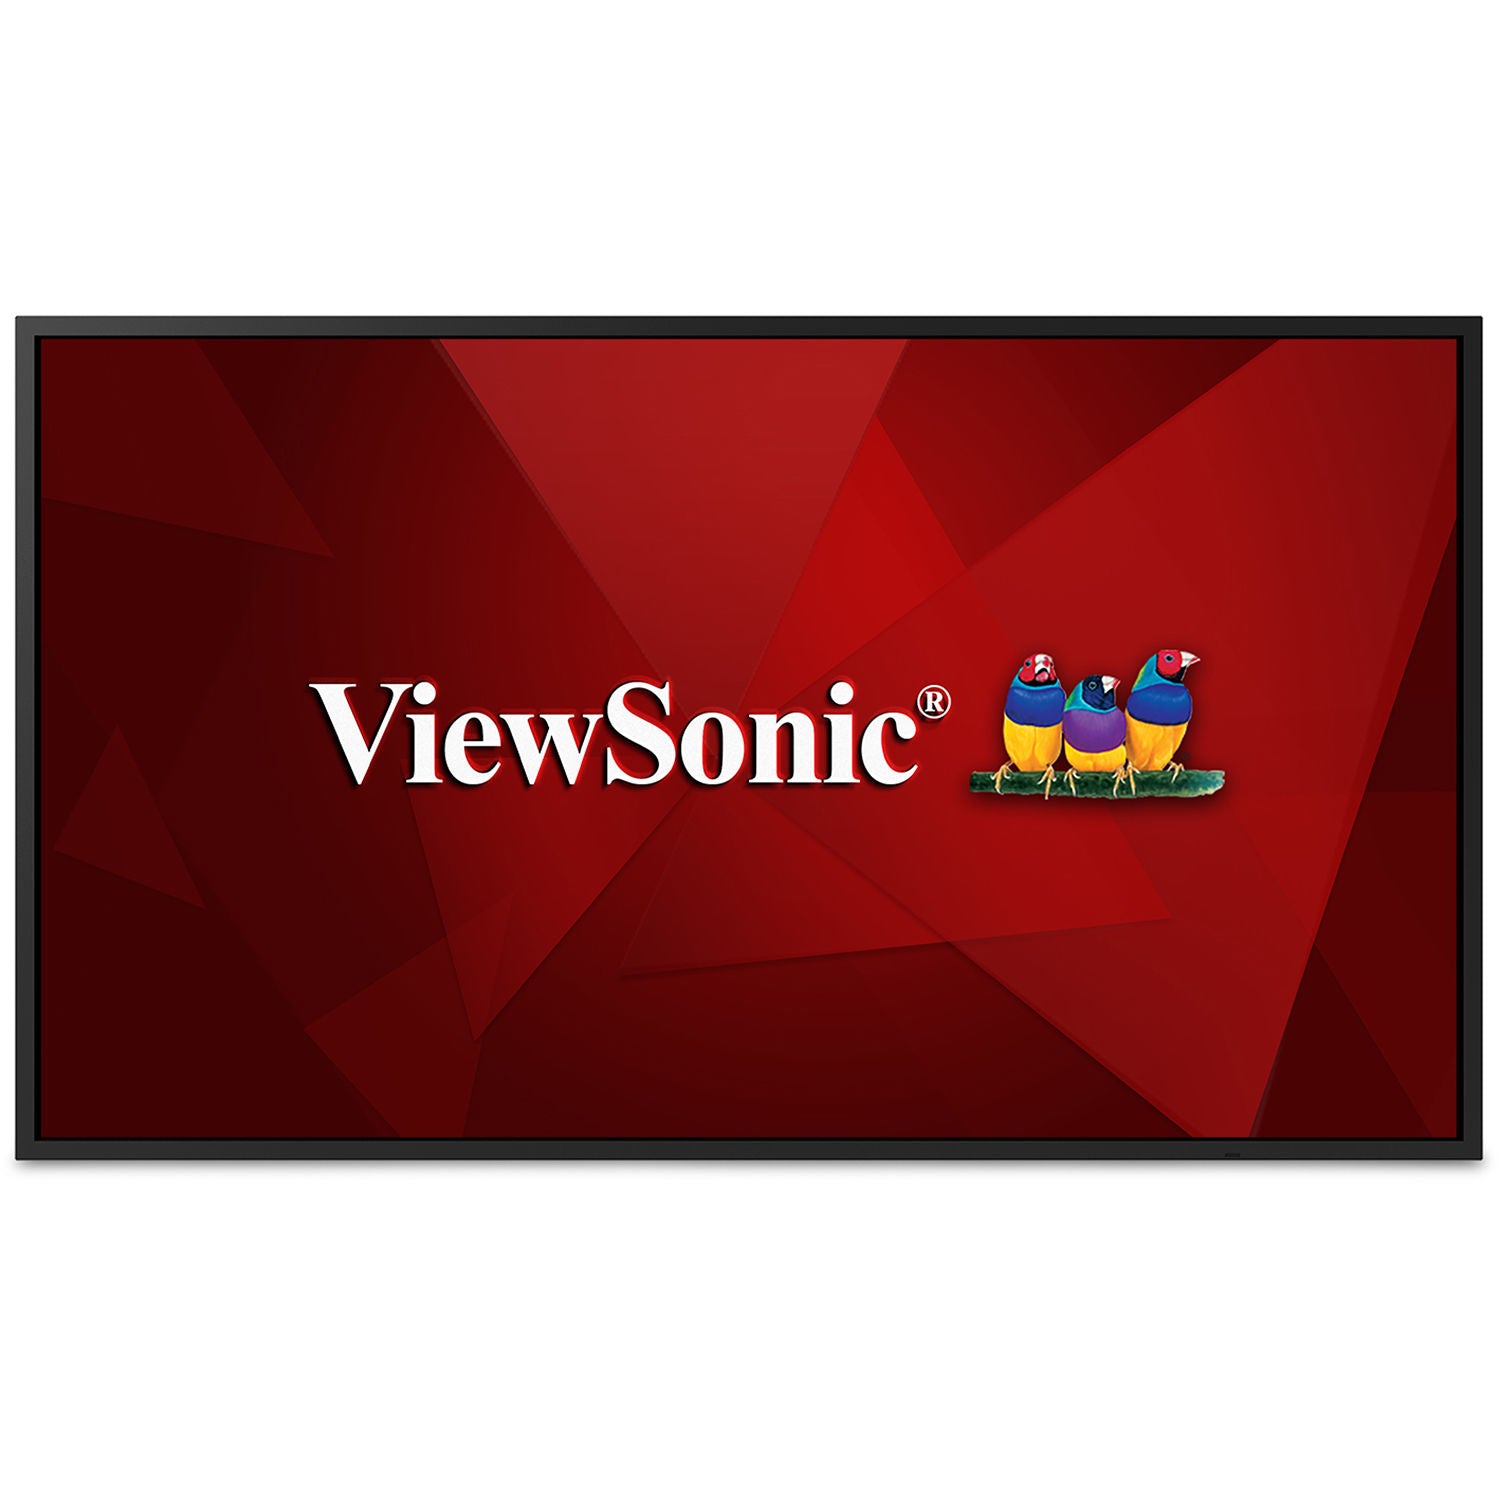 ViewSonic CDE4320 43" 3840 x 2160 350 cd/m2 Commercial Display Certified Refurbished